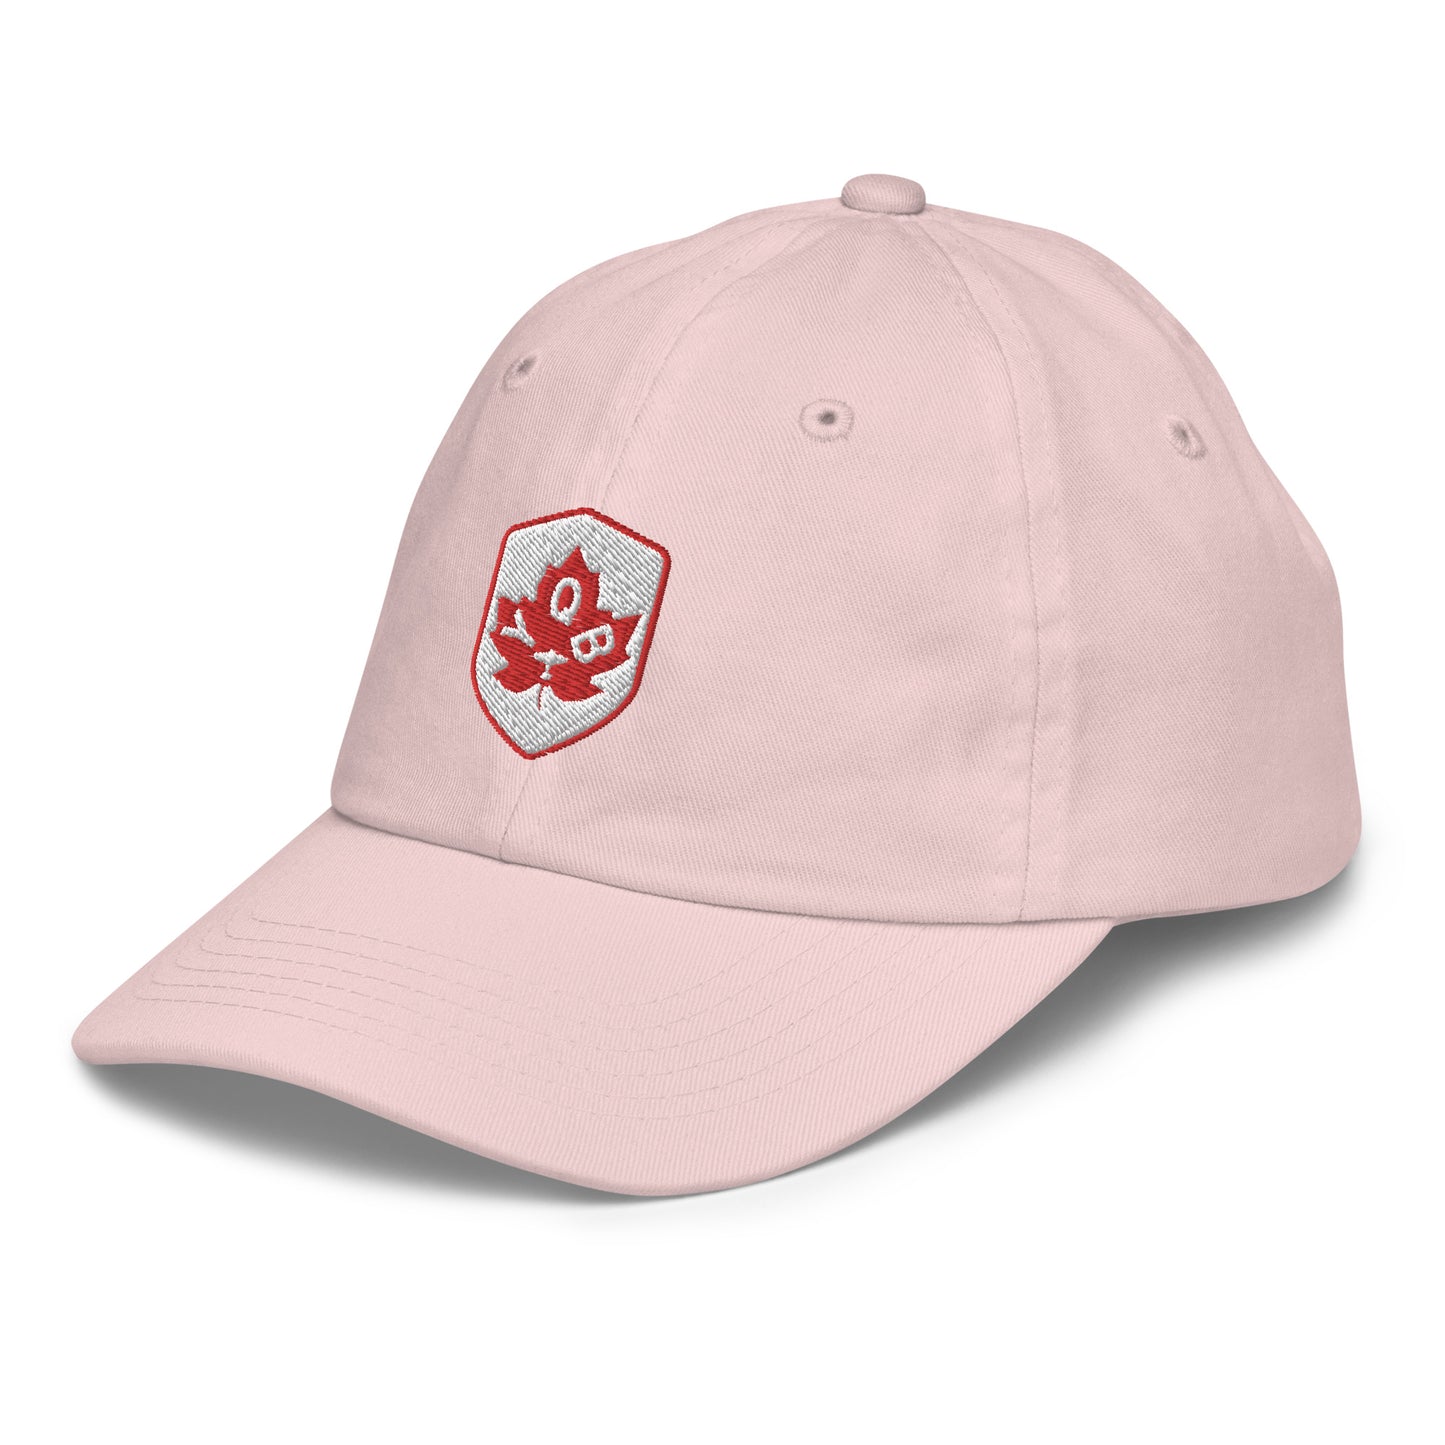 Maple Leaf Kid's Cap - Red/White • YQB Quebec City • YHM Designs - Image 25